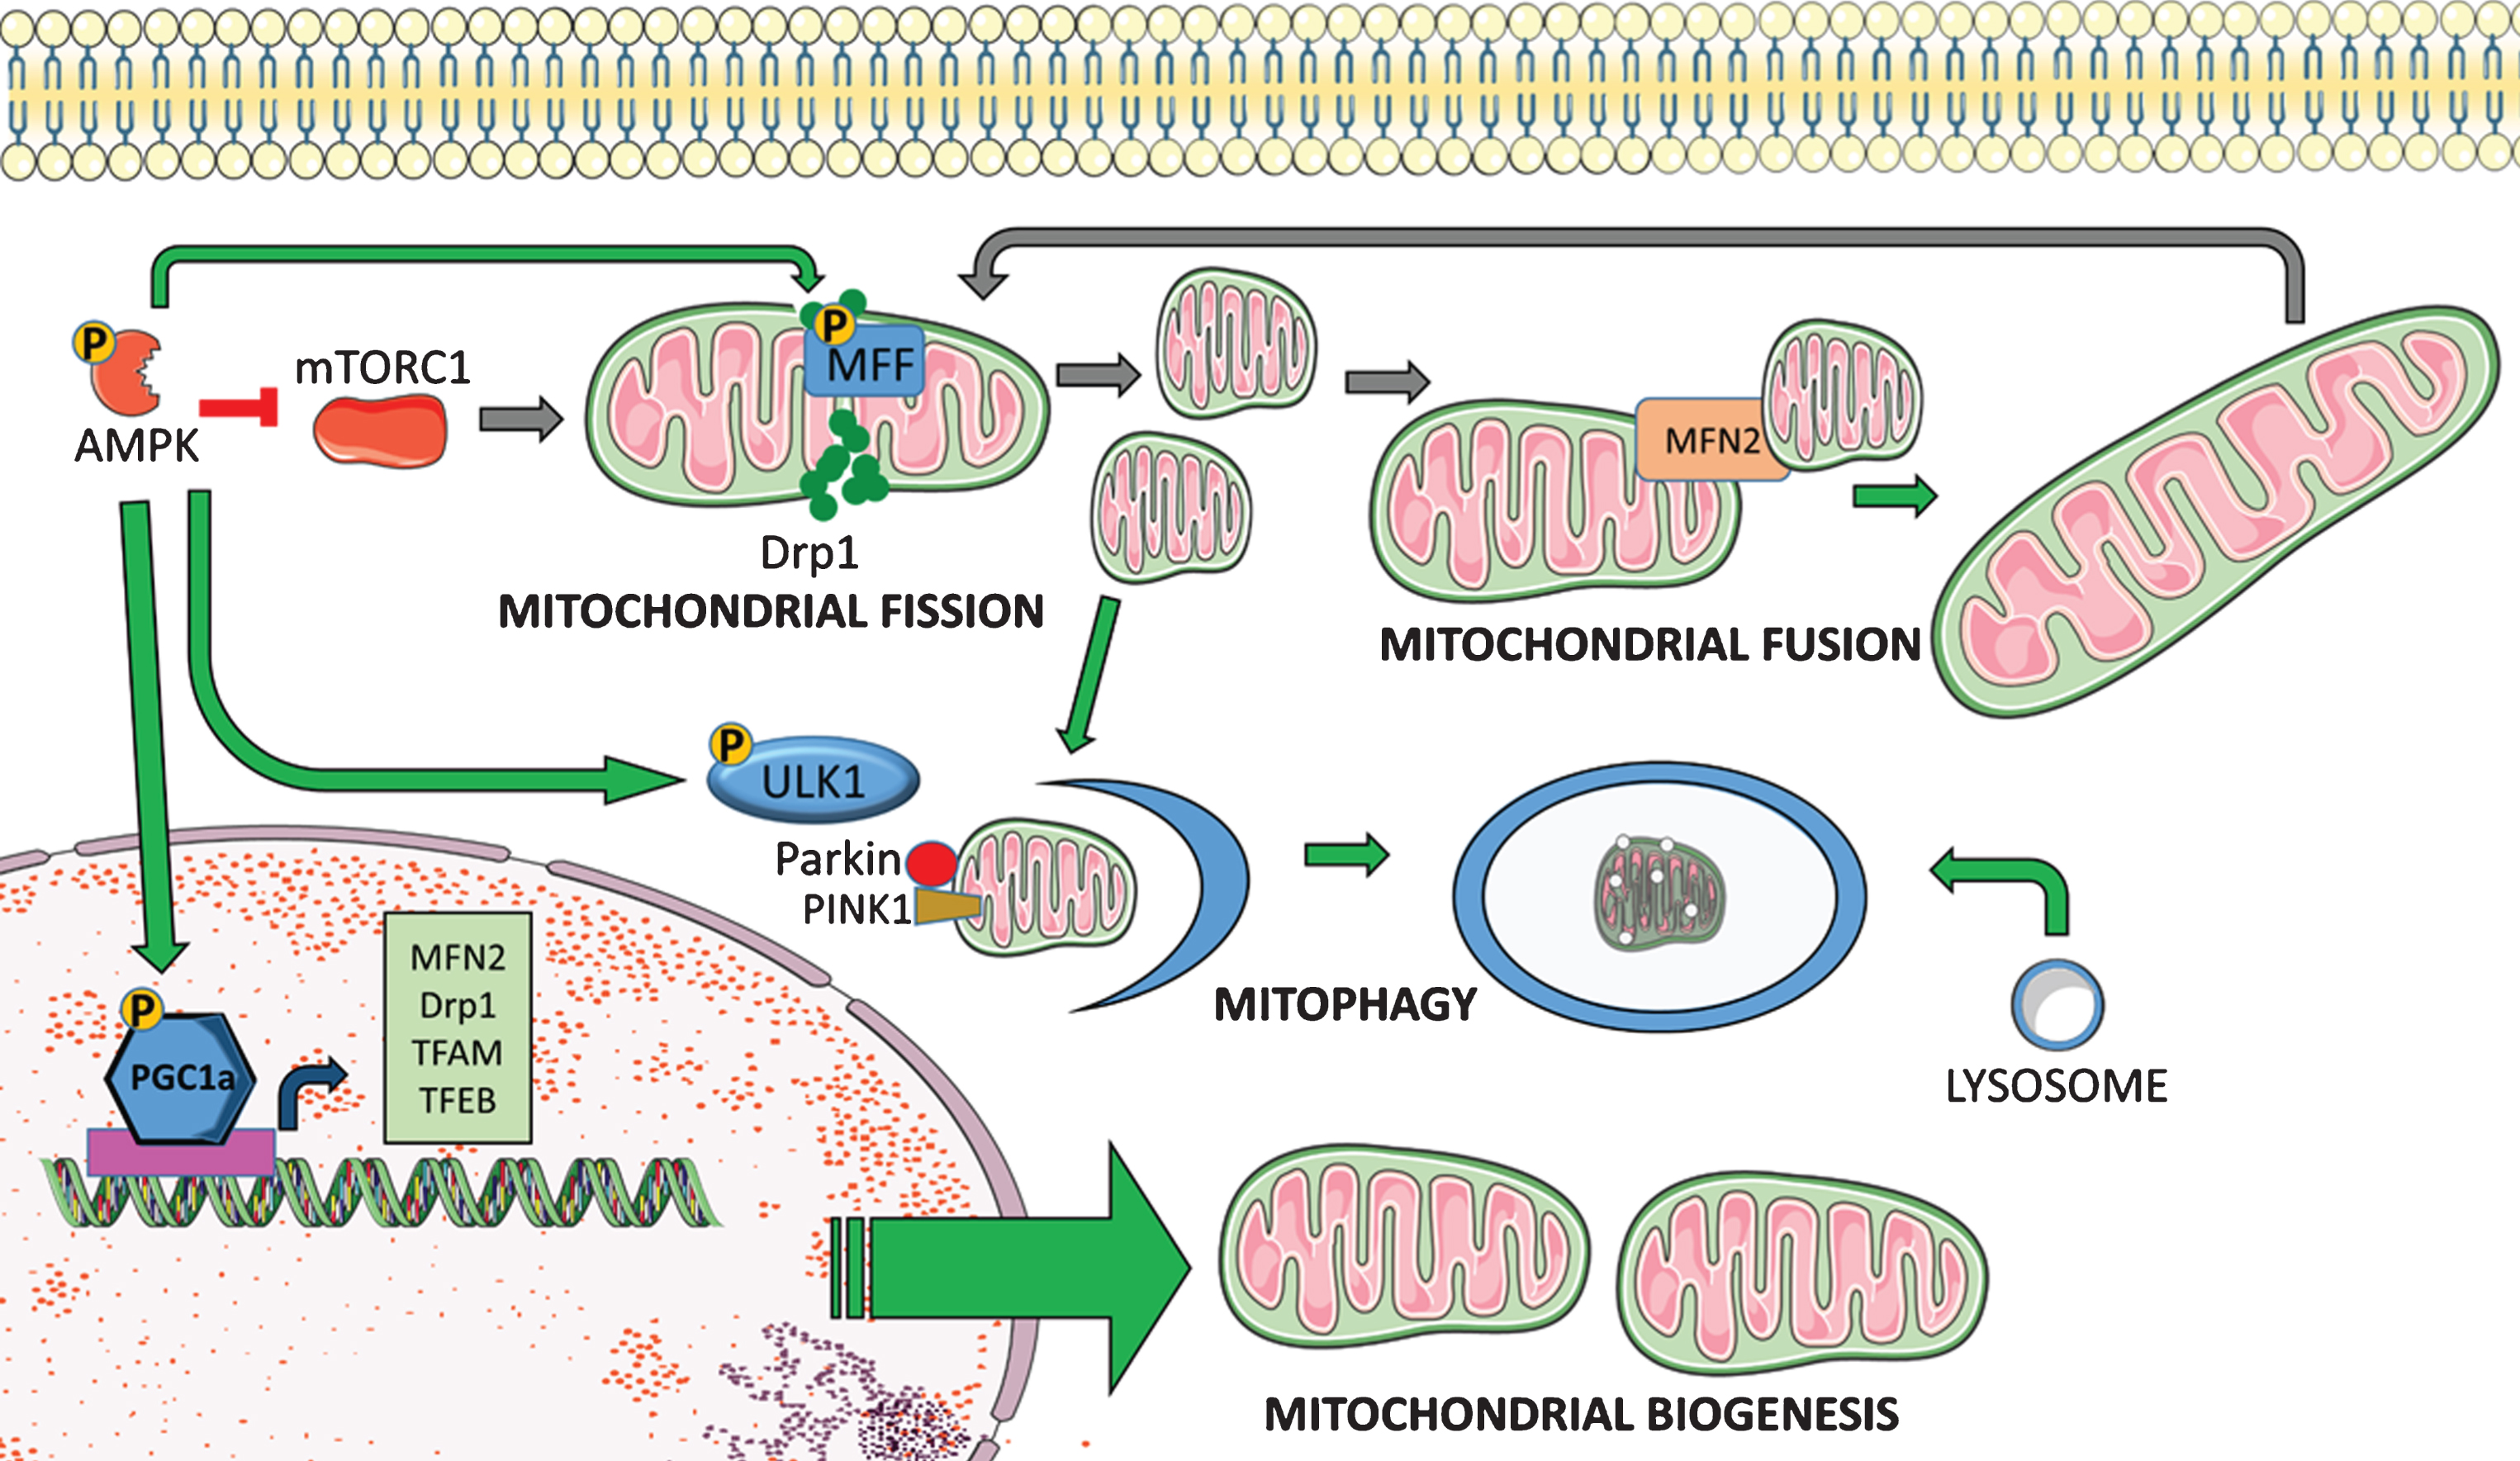 AMPK regulates mitochondrial quality control. AMPK facilitates mitochondrial quality control through direct phosphorylation of target proteins and transcriptional regulation of relevant genes. AMPK promotes mitochondrial biogenesis via increased transcription and post-translational phosphorylation of PGC-1α. PGC-1α is a master regulator of mitochondrial biogenesis that activates mitochondrial transcription factor A (TFAM), which drives transcription and replication of mitochondrial DNA. PGC-1α also facilitates mitochondrial fission and fusion through expression of Drp1 and Mitofusin2 (MFN2), and it promotes mitophagy and lysosomal biogenesis via activation of transcription factor EB (TFEB). AMPK can further promote mitophagy through phosphorylation of ULK1, which facilitates autophagosome formation and targeting of damaged mitochondria to lysosomes. Additionally, phosphorylation of mitochondrial fission factor (MFF) facilitates mitophagy through increased fission.